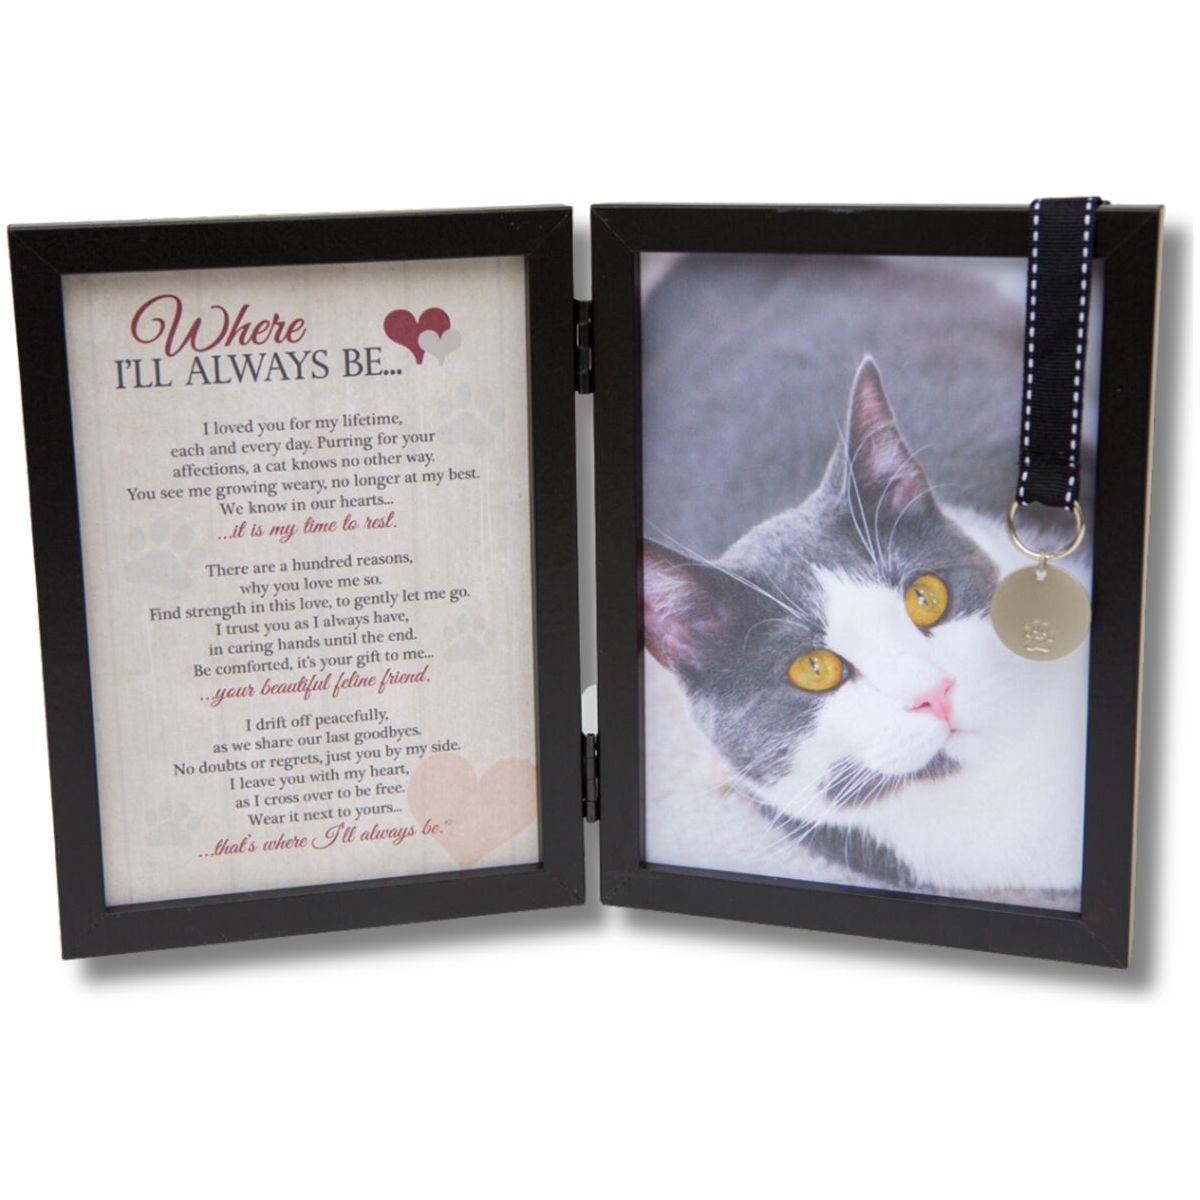 Cat Loss Memorial Gift - Where I'll Always Be Frame for cat loss, 5x7 double black table frame with "Where I'll Always Be" poem on one side and  5x7 photo space on the other.